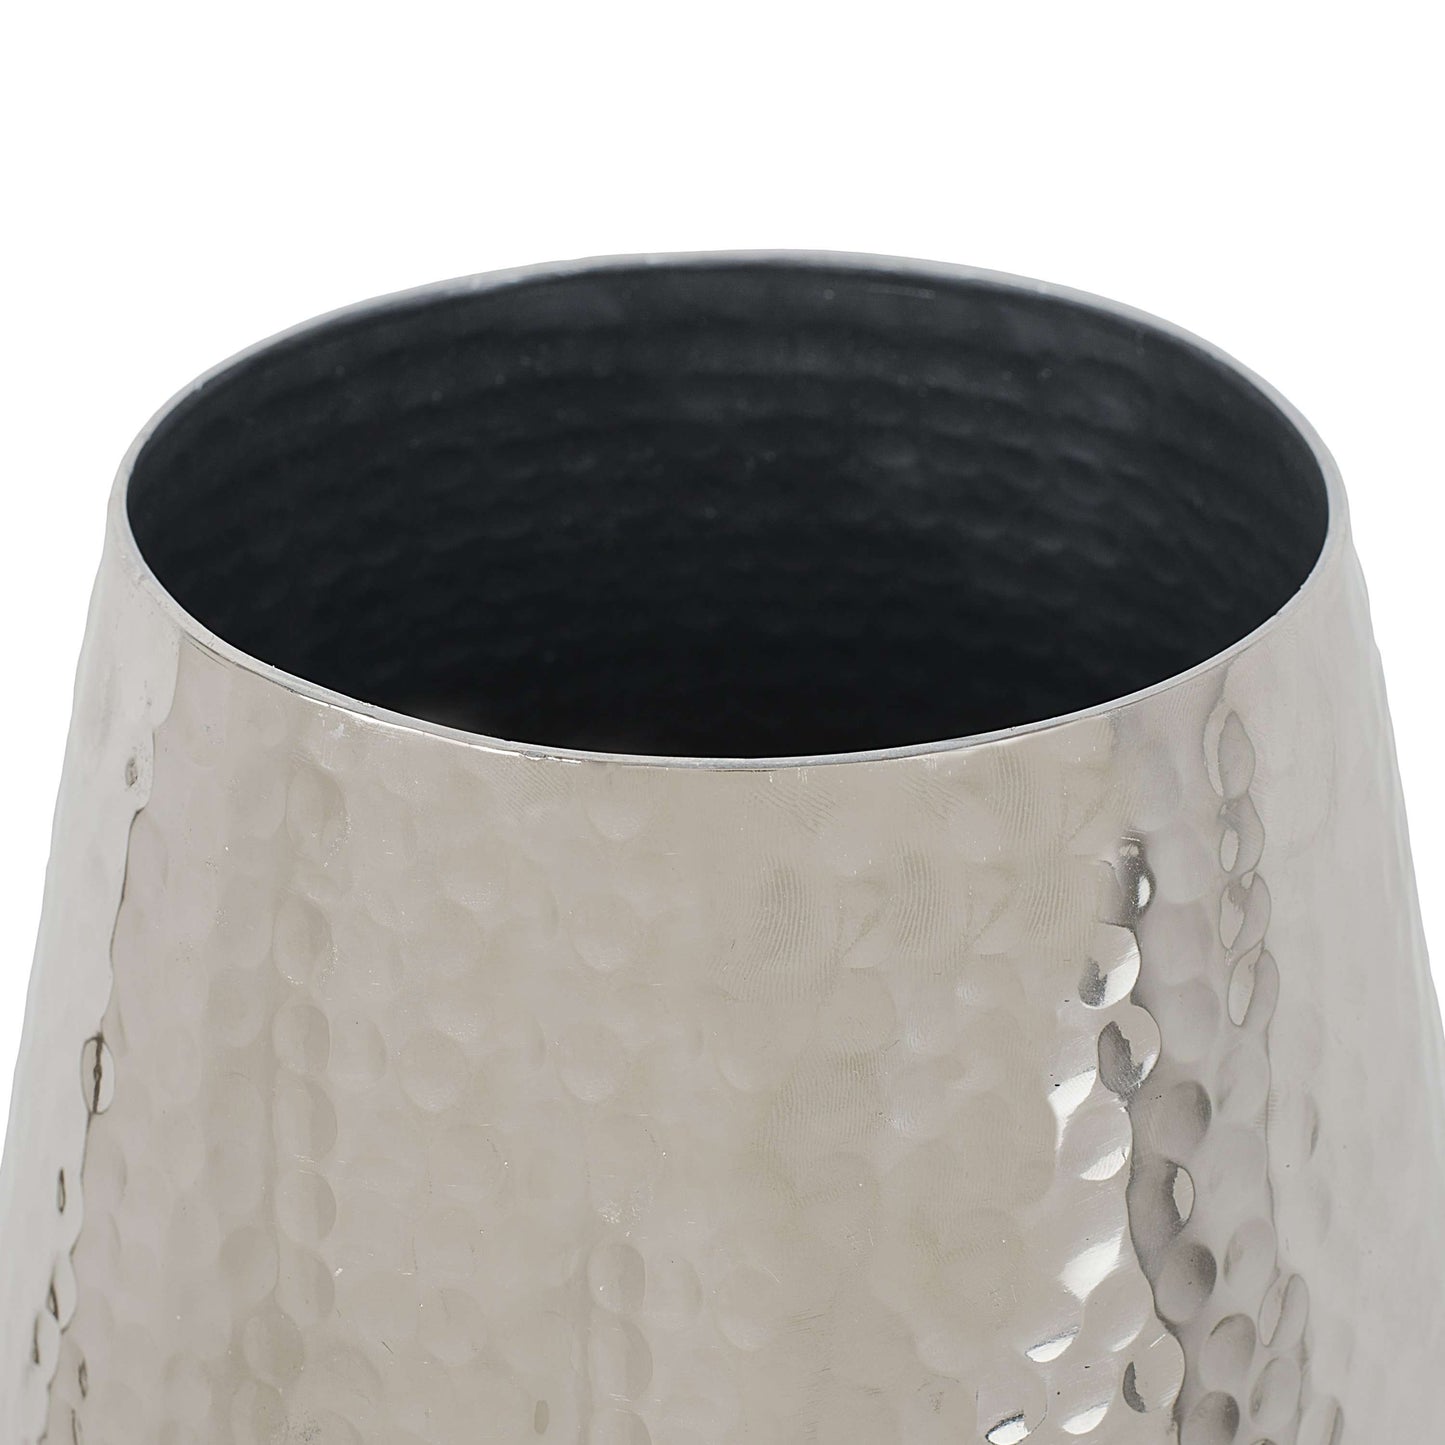 SWHF Large Silver Hammered Metal Vase - SWHF